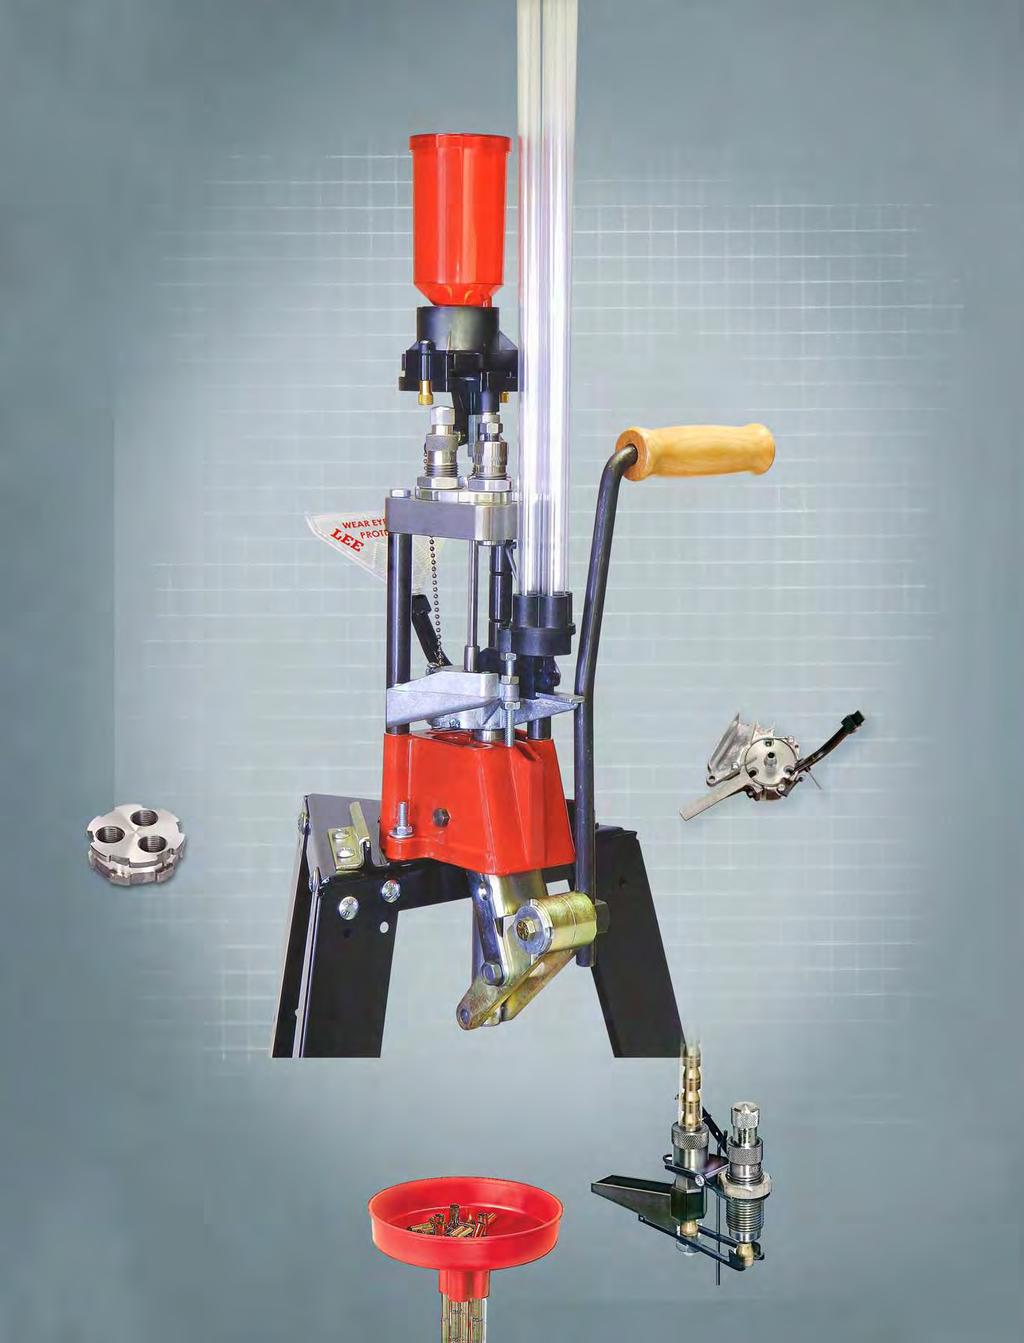 24 RELOADING 17 PRO 1000 FULLY AUTOMATIC AUTO-DRUM PRESS CONFIGURATION Lee Pro 1000 Add a bullet and pull the lever; all other operations are automatic.